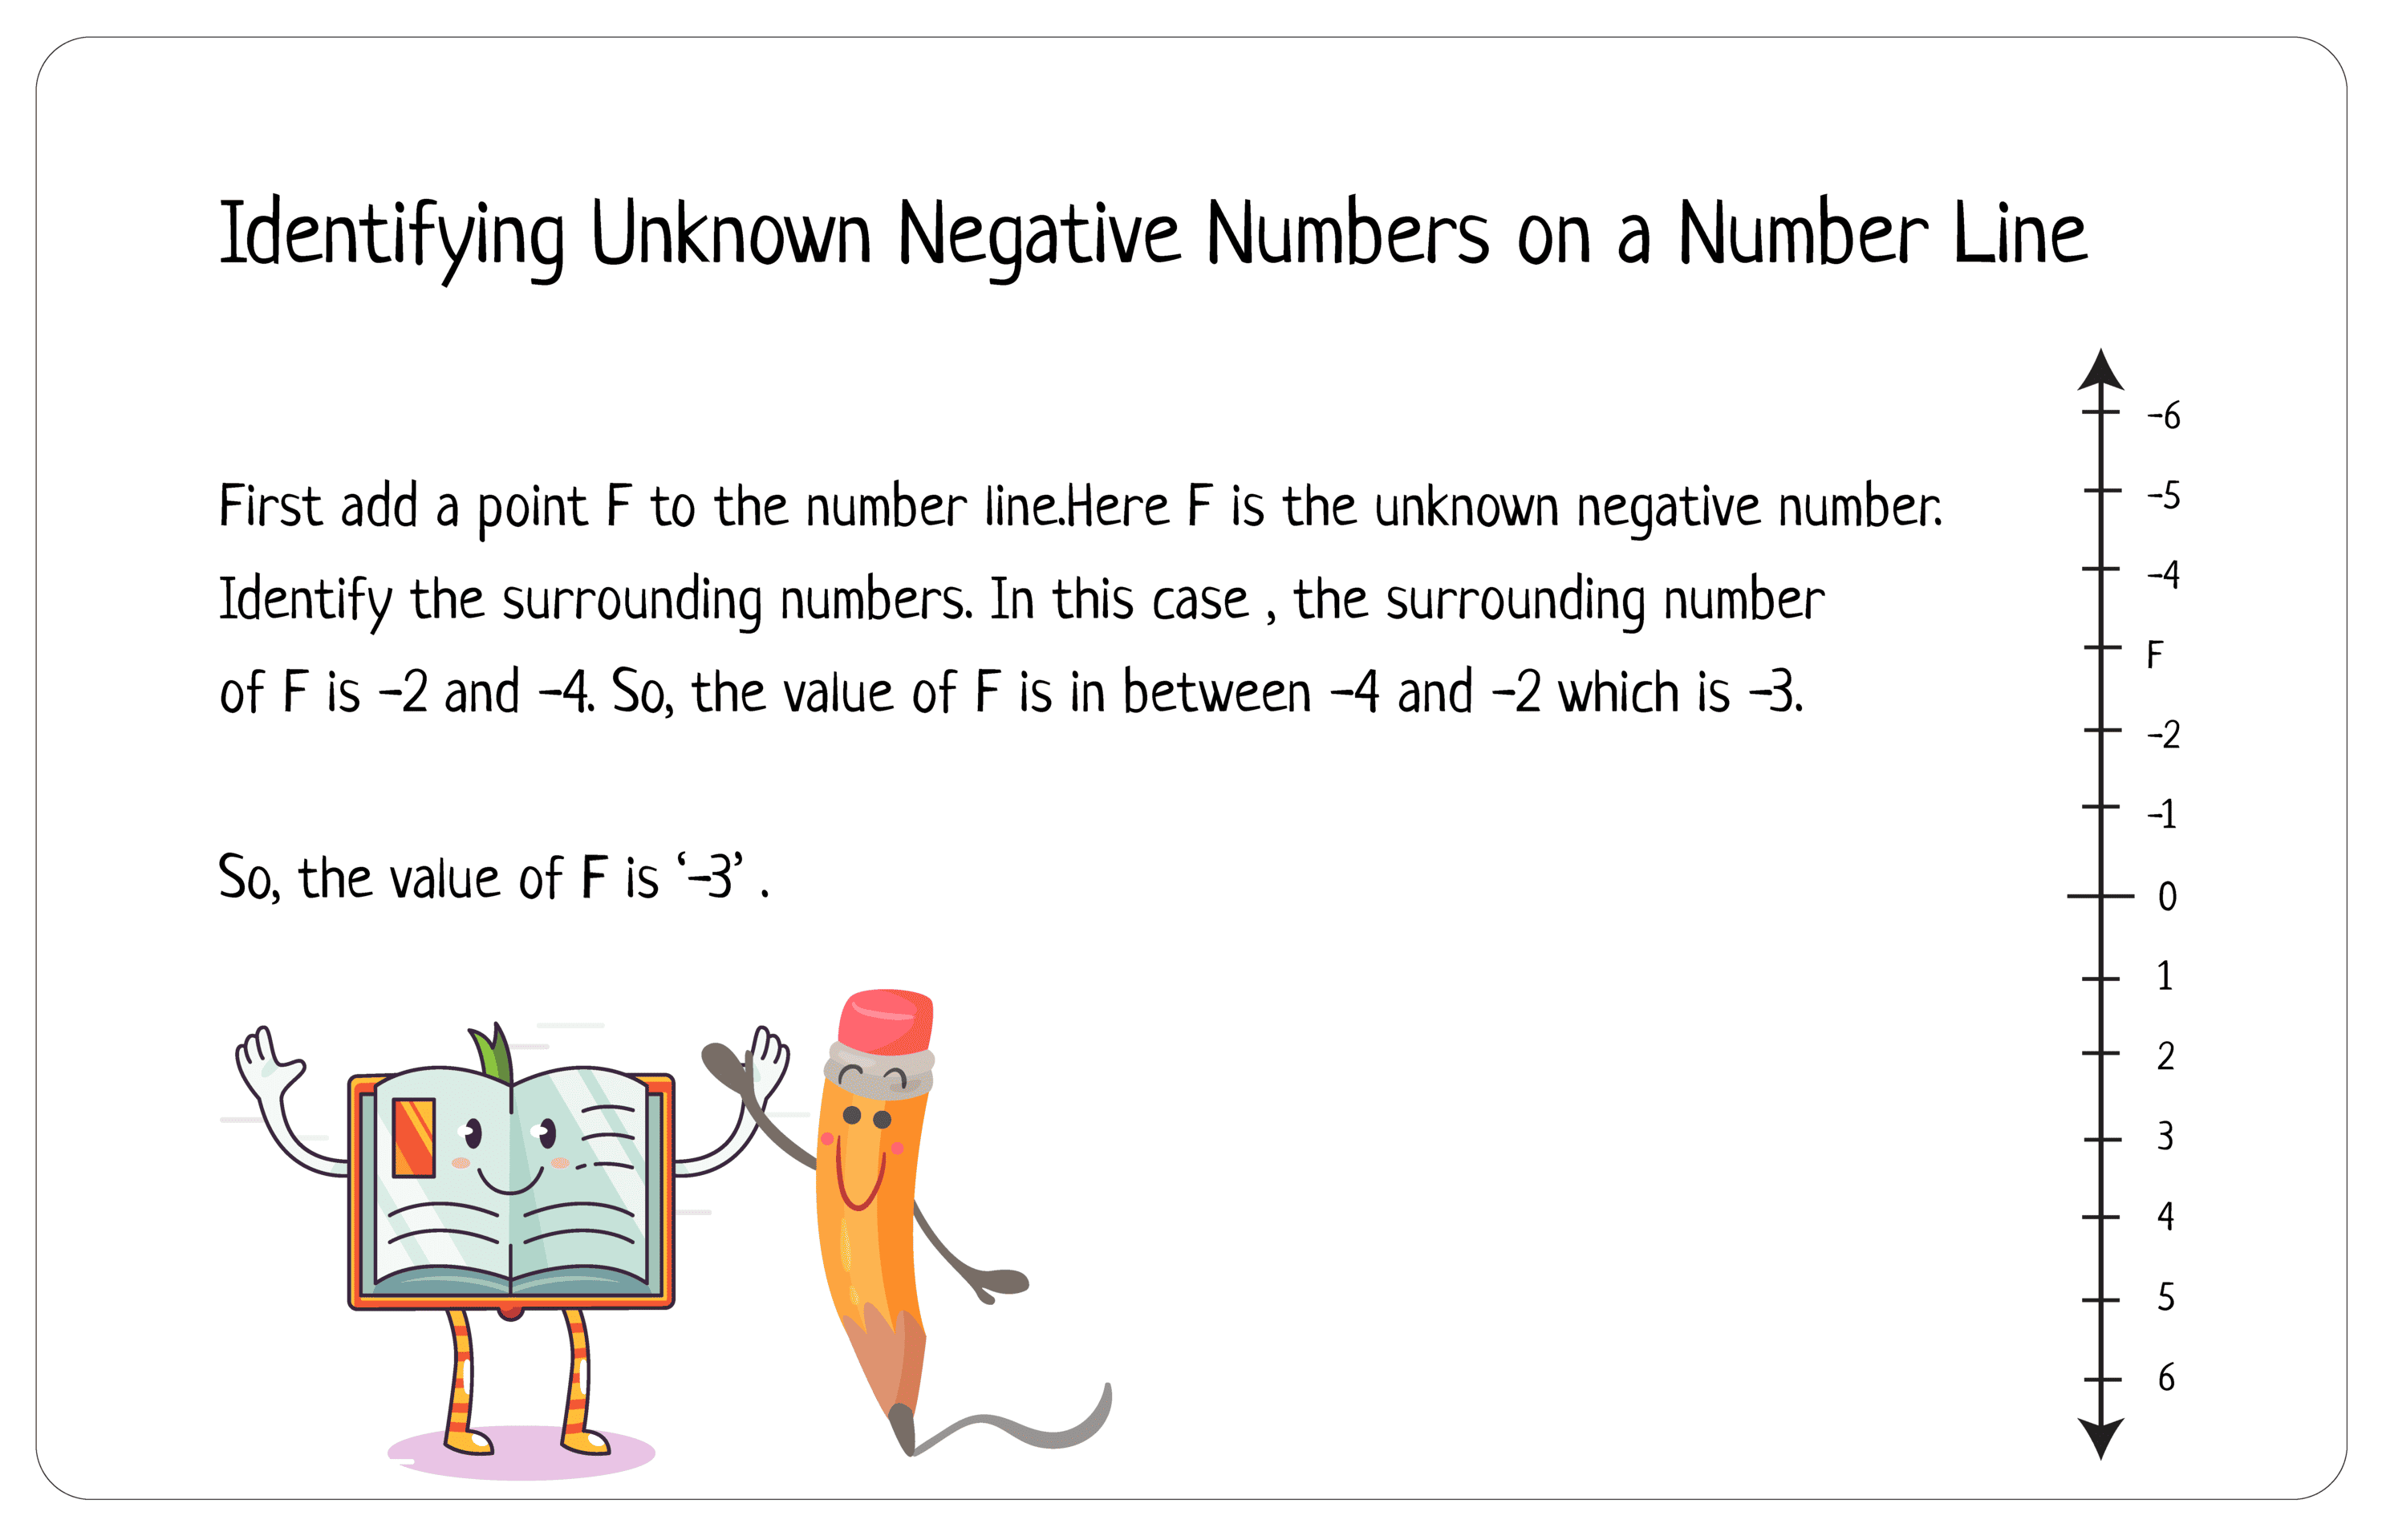 Steps of plotting negative numbers on a number line (3)